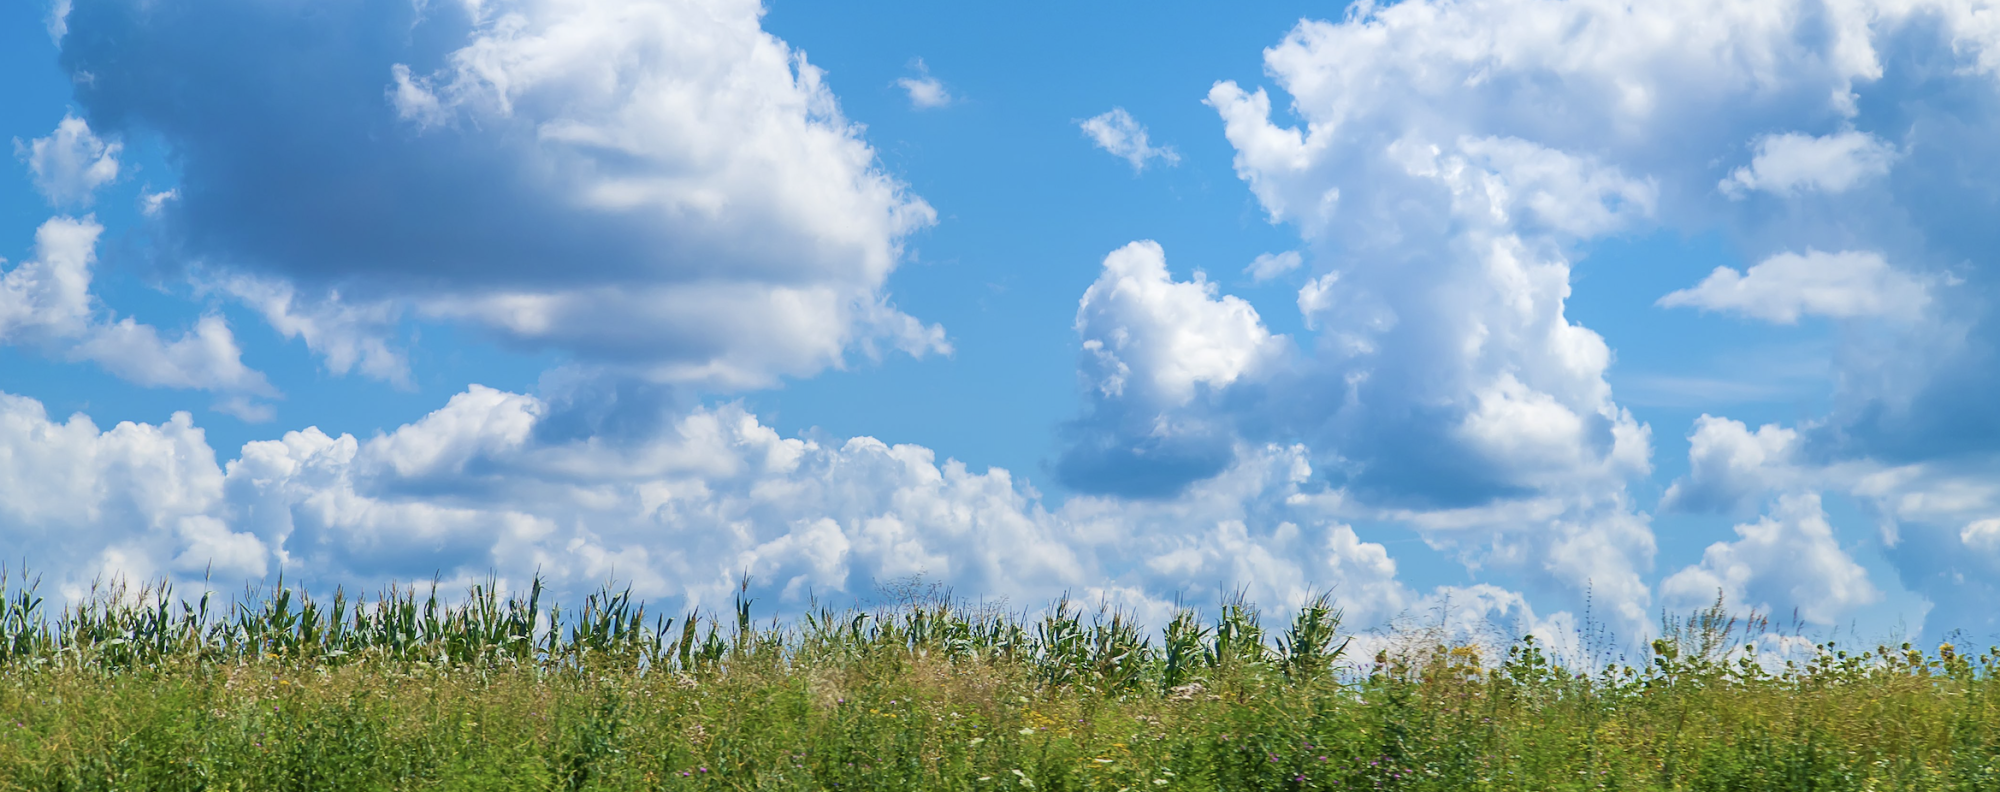 blue sky with clouds and green grass in the foreground